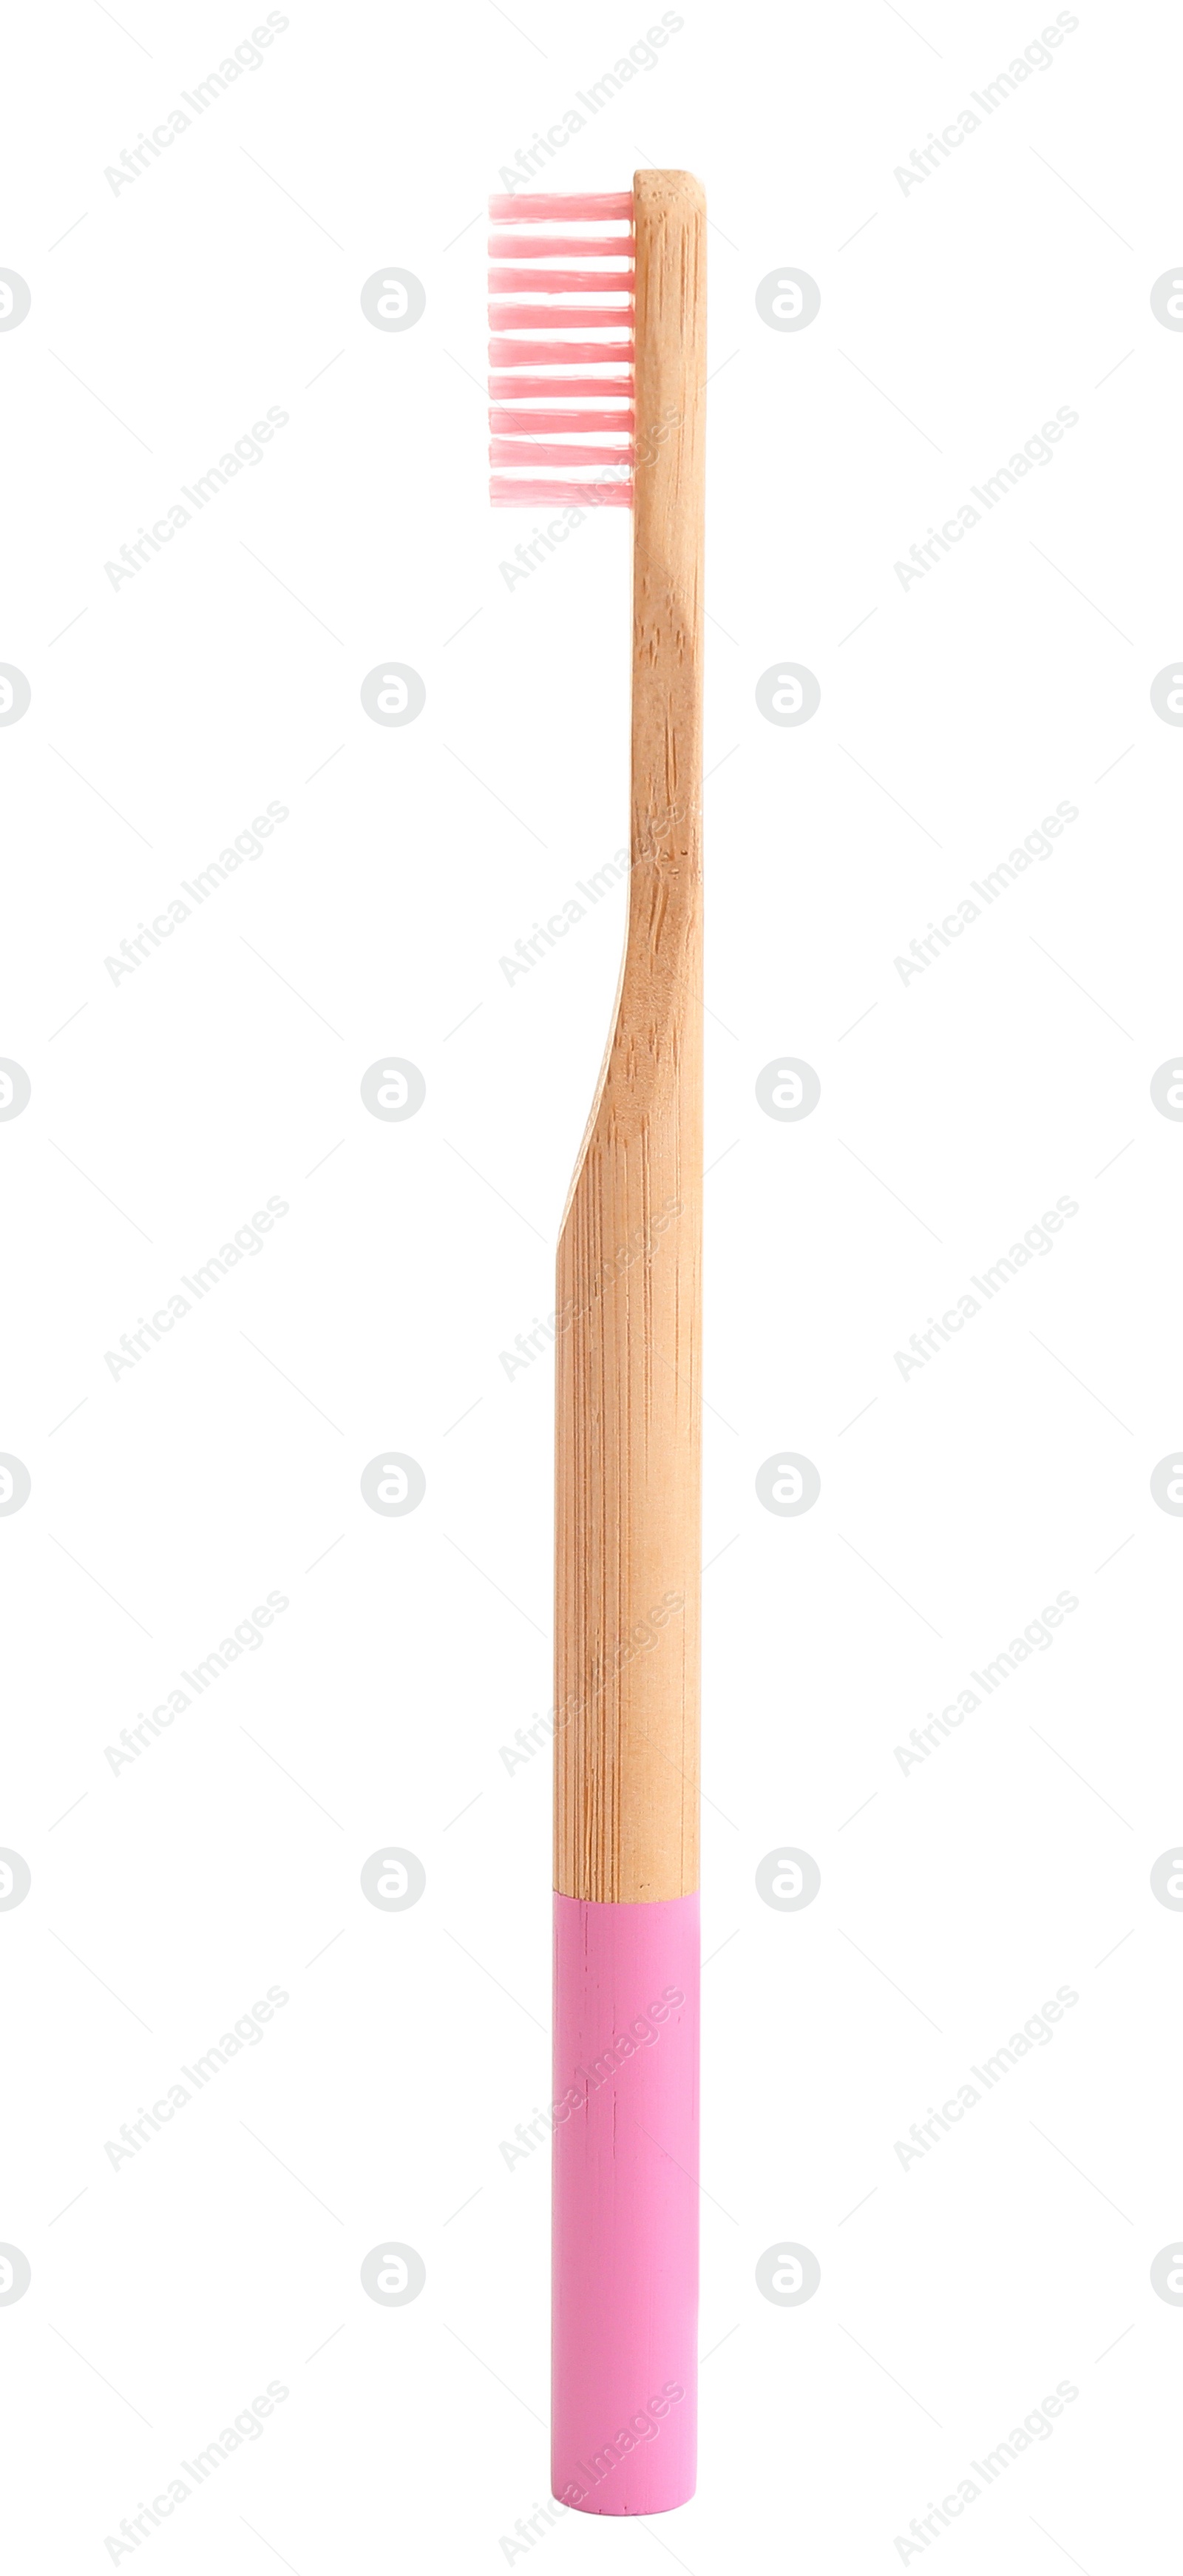 Photo of Bamboo toothbrush with pink bristle isolated on white